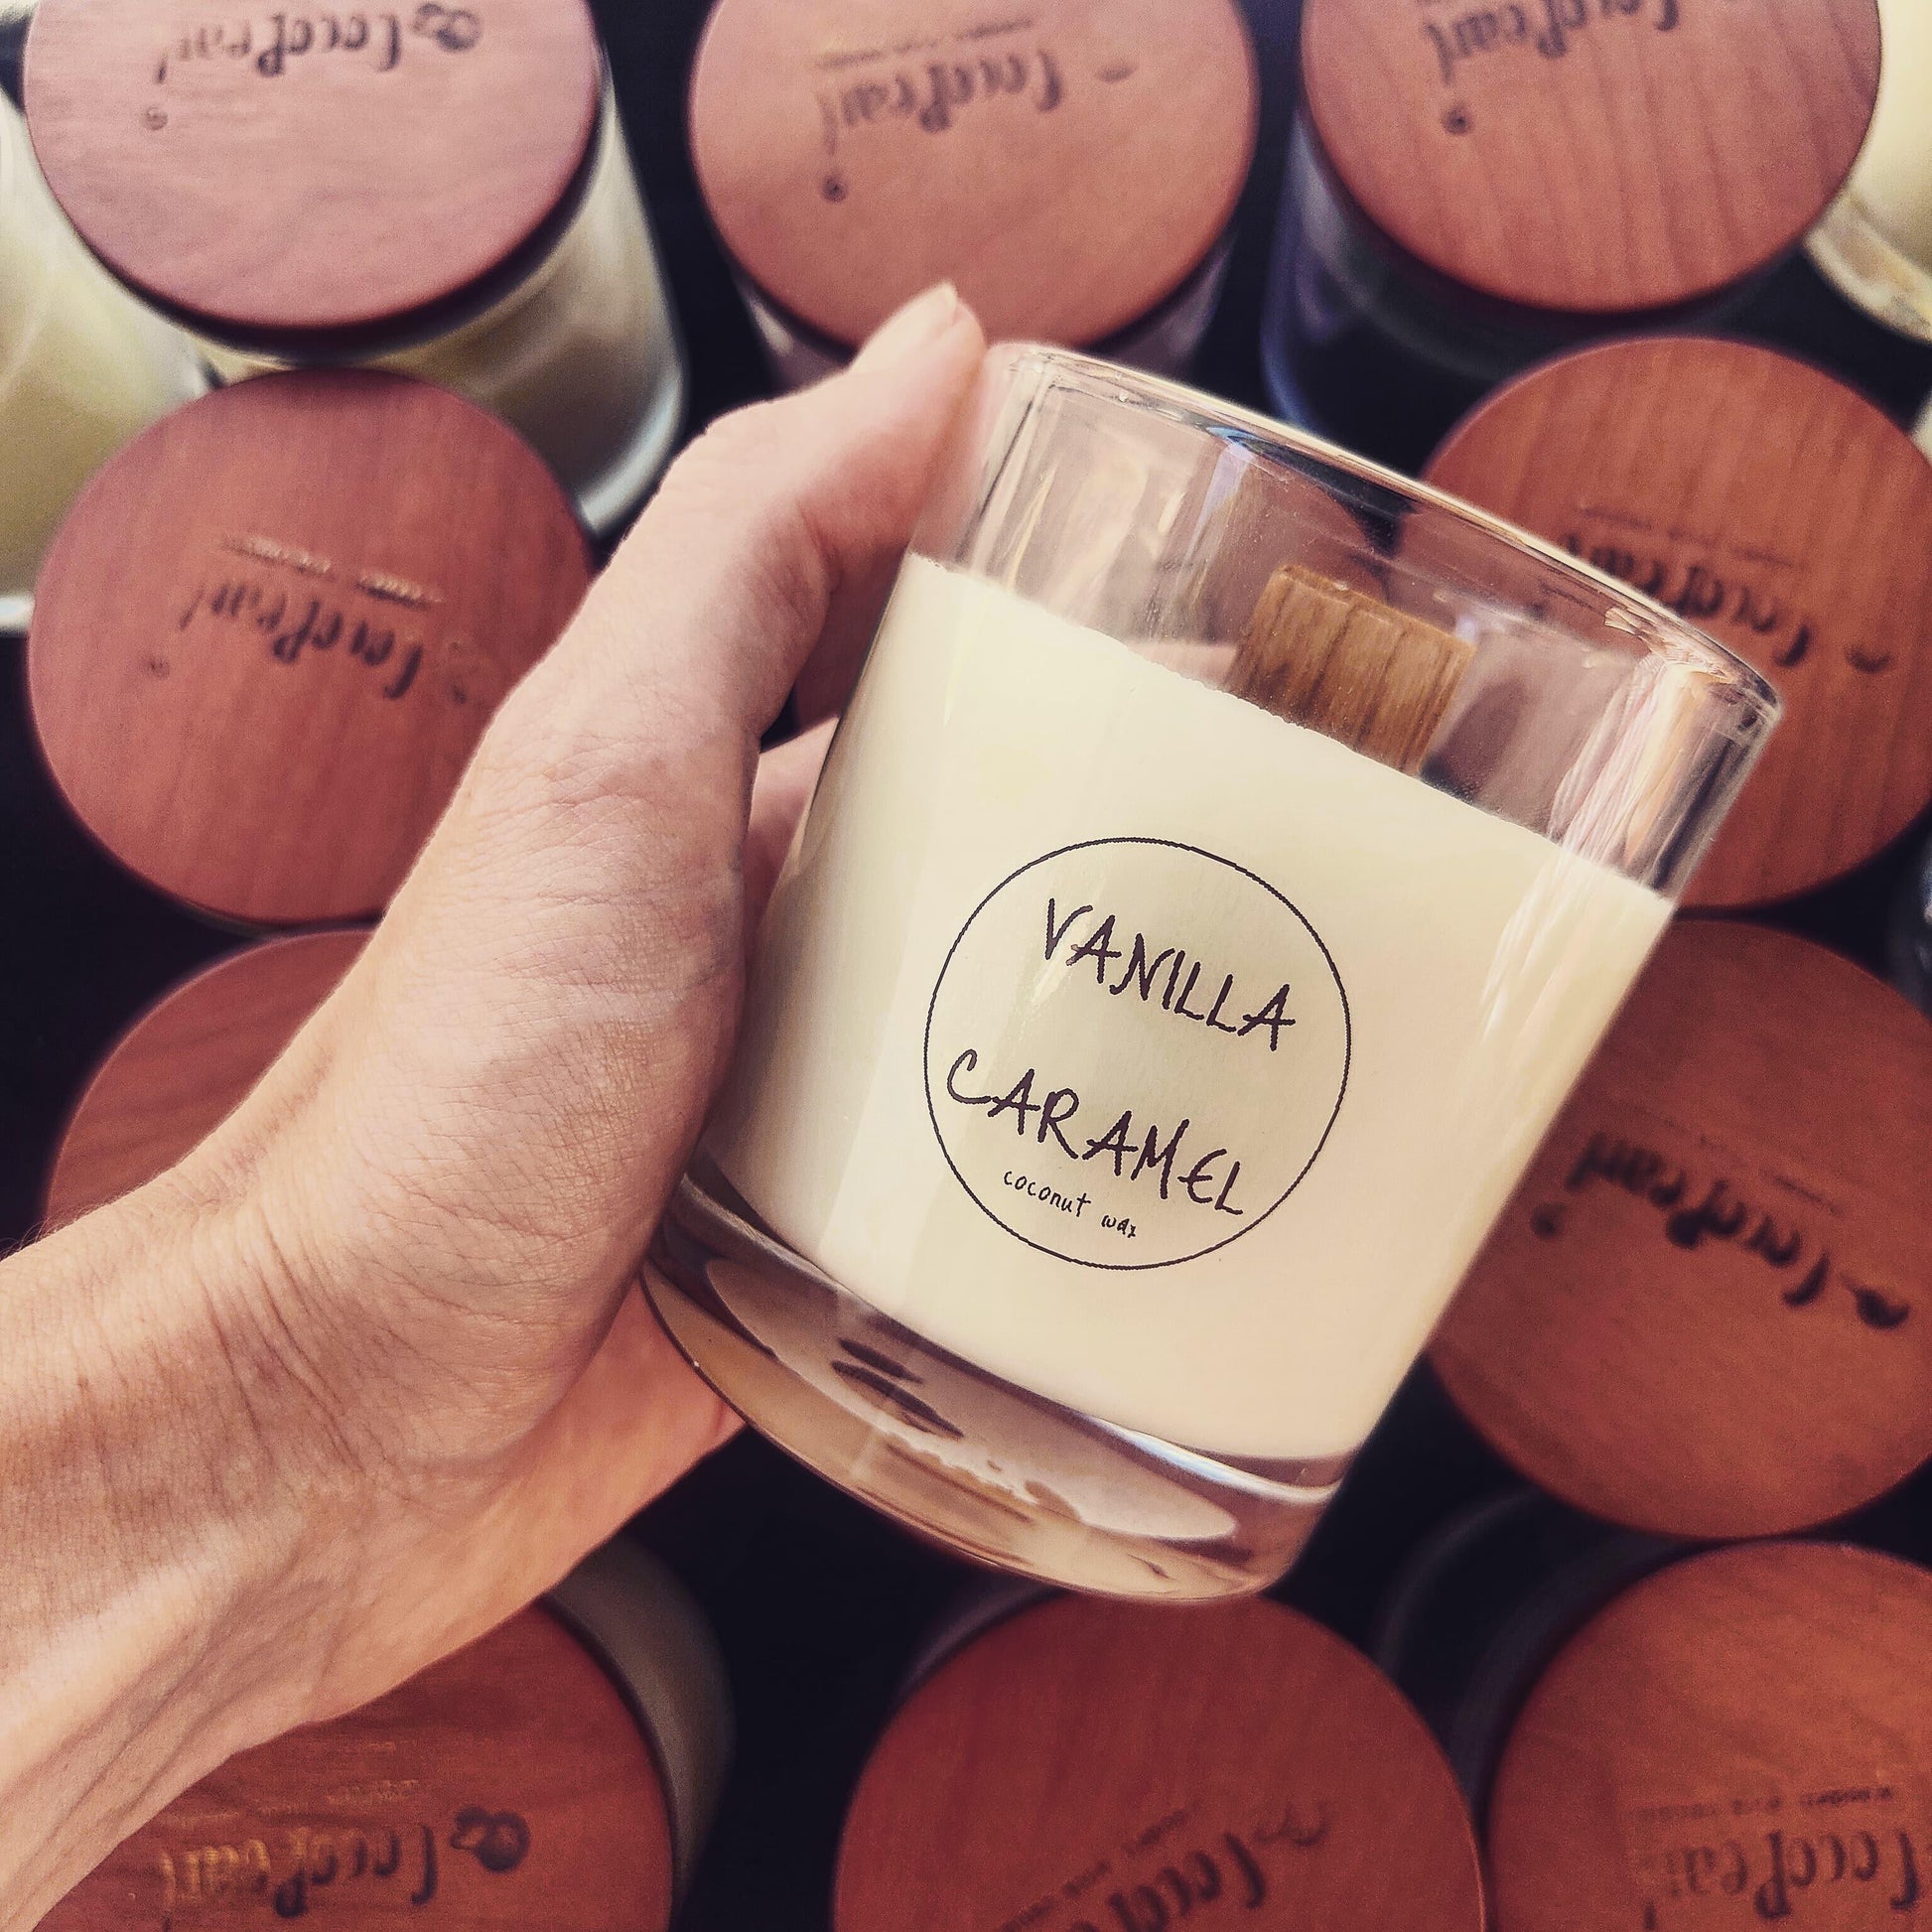 Vanilla caramel | Scented Candle - Wooden wick - Review